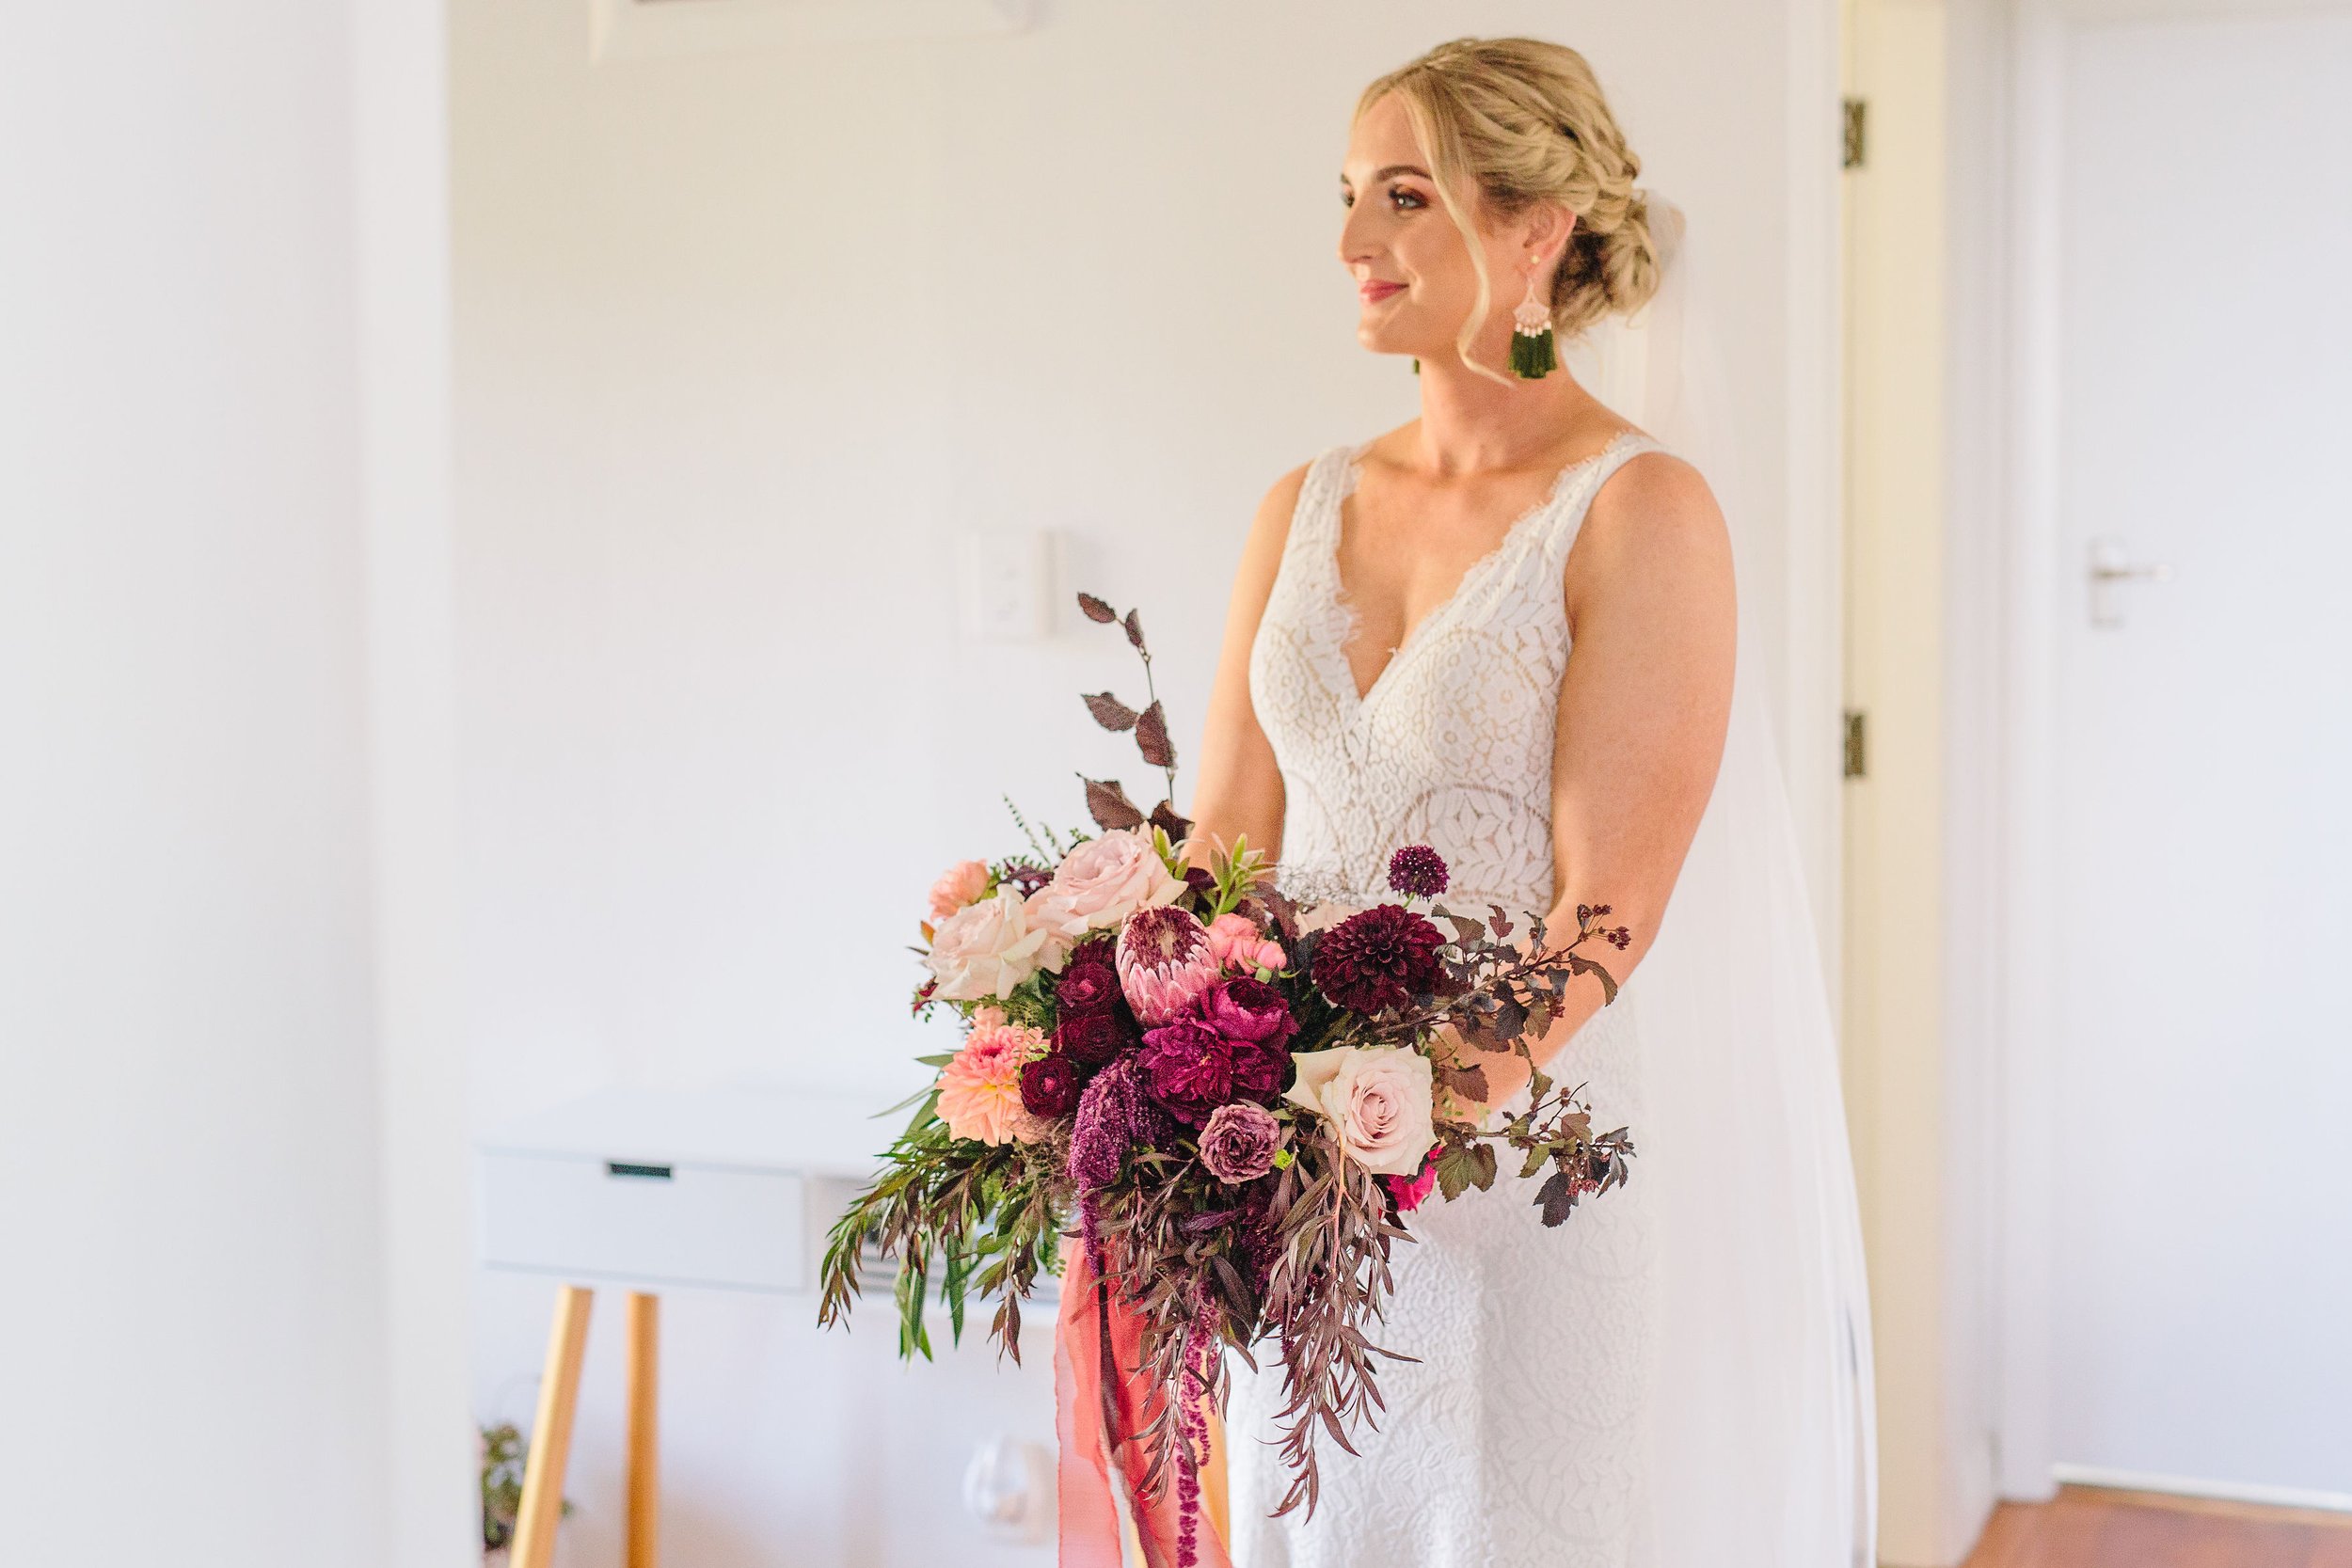 Real wedding inspiration - boho bride and colourful bouquet.jpg